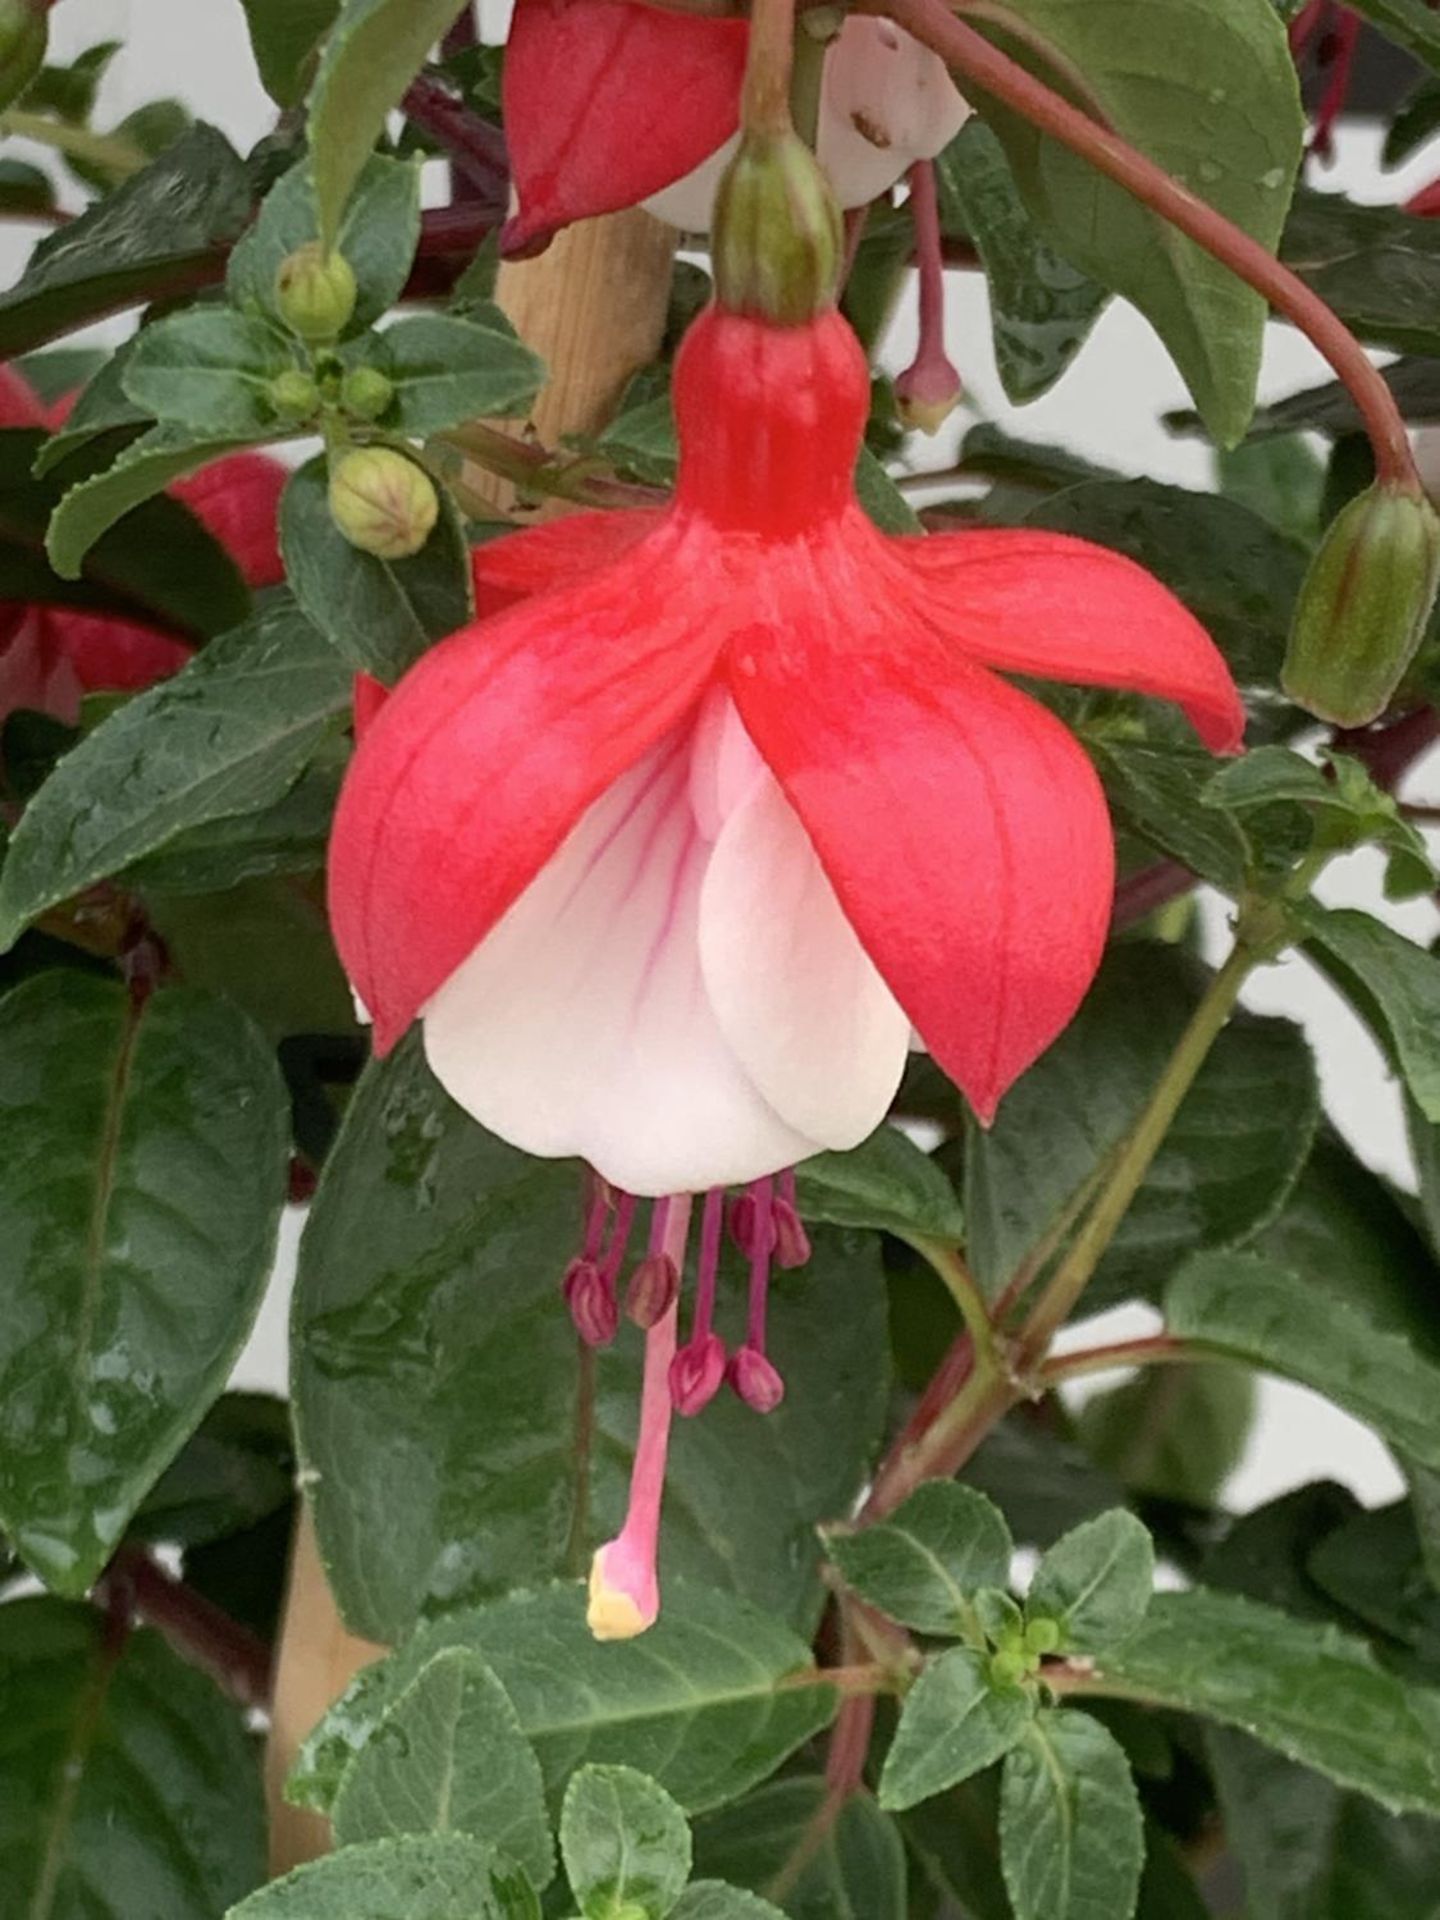 TWO BELLA STANDARD FUCHSIA IN A 3 LTR POTS 70CM -80CM TALL TO BE SOLD FOR THE TWO PLUS VAT - Image 3 of 5